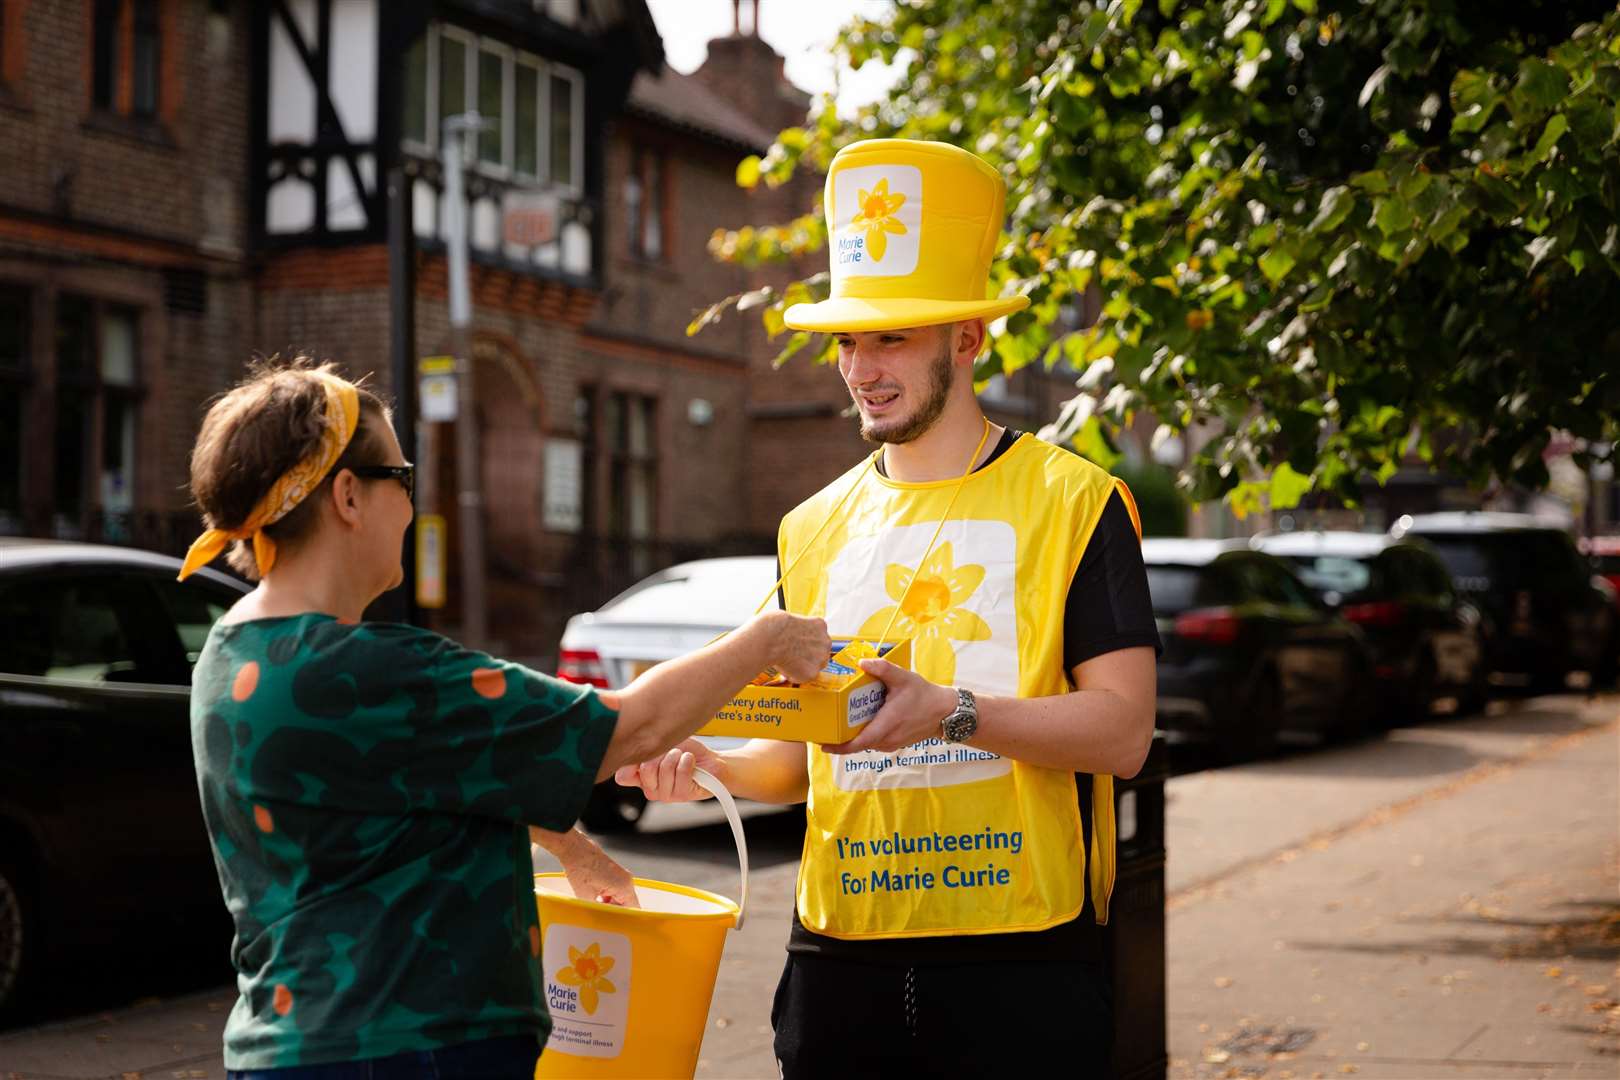 Can you volunteer just two hours of your time to help Marie Curie?